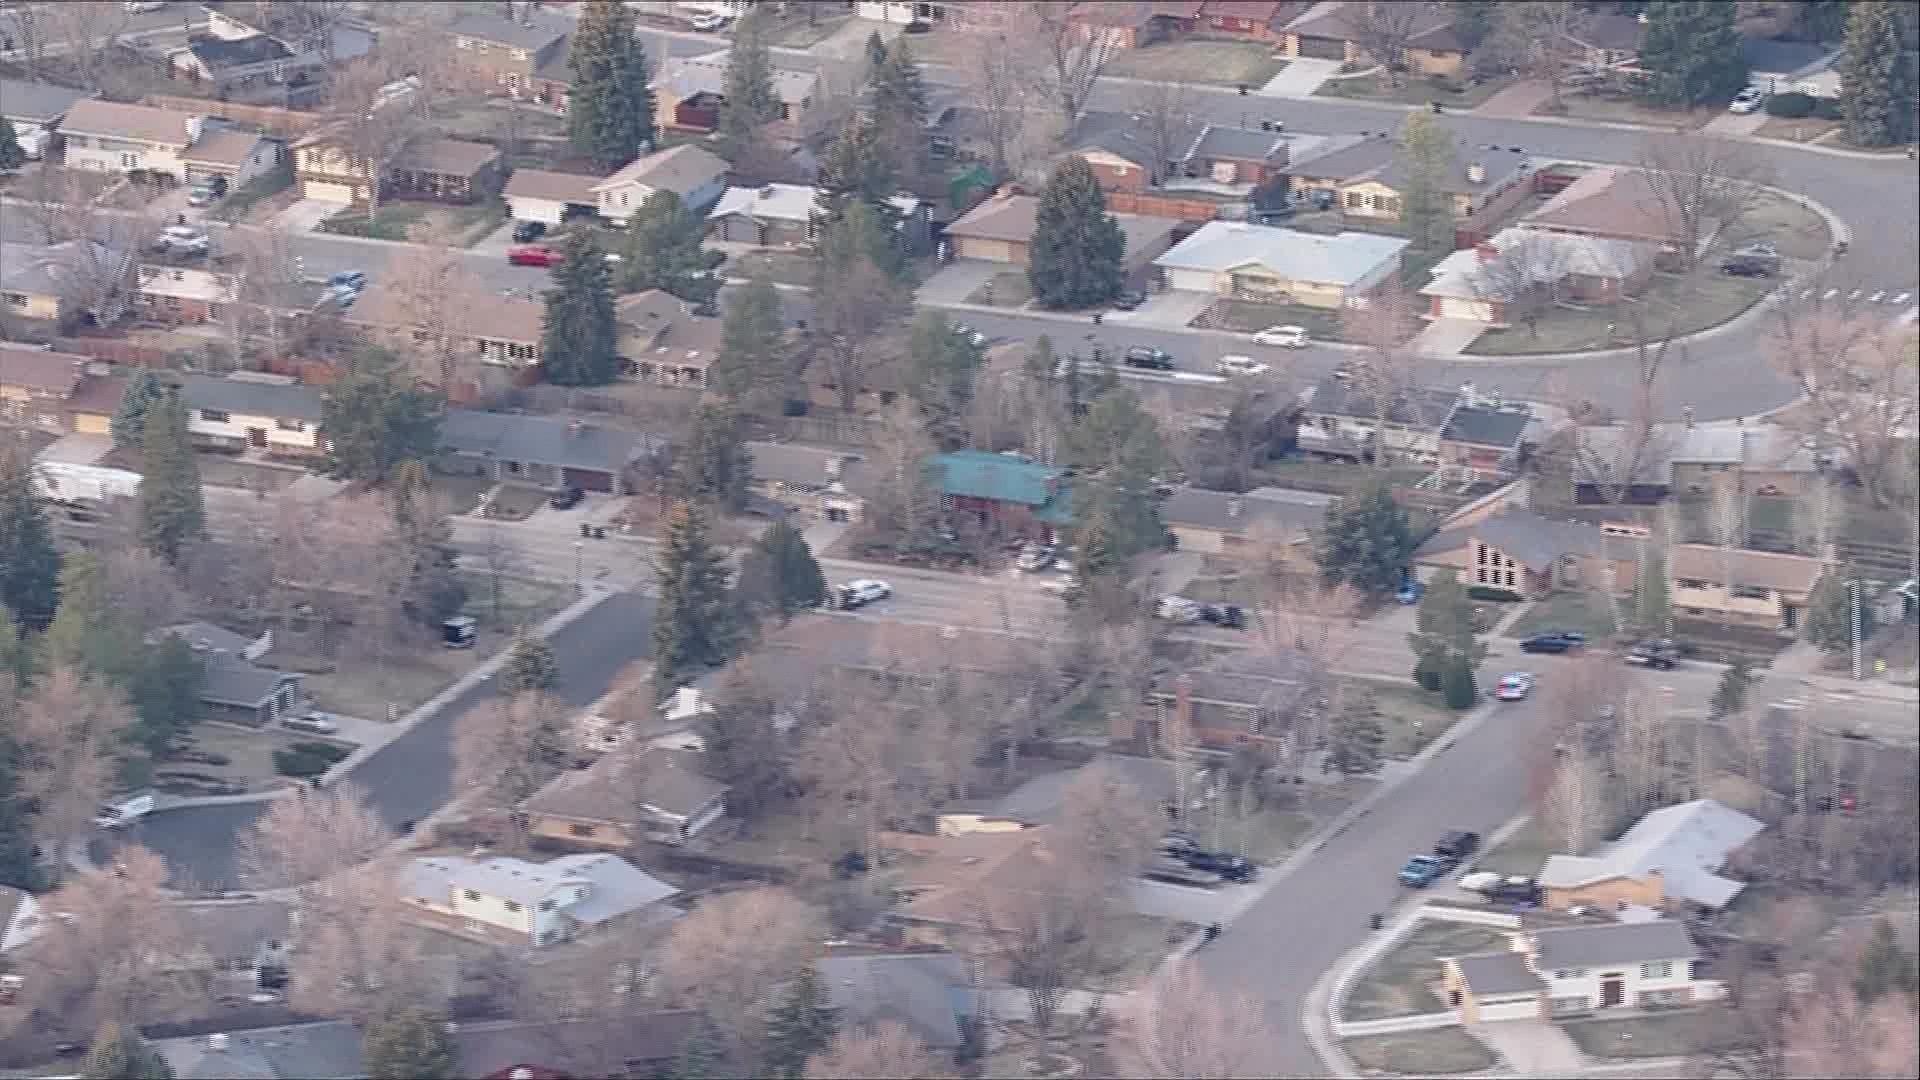 Sky9 over the scene as police try to contact a barricaded suspect in northwest Longmont.